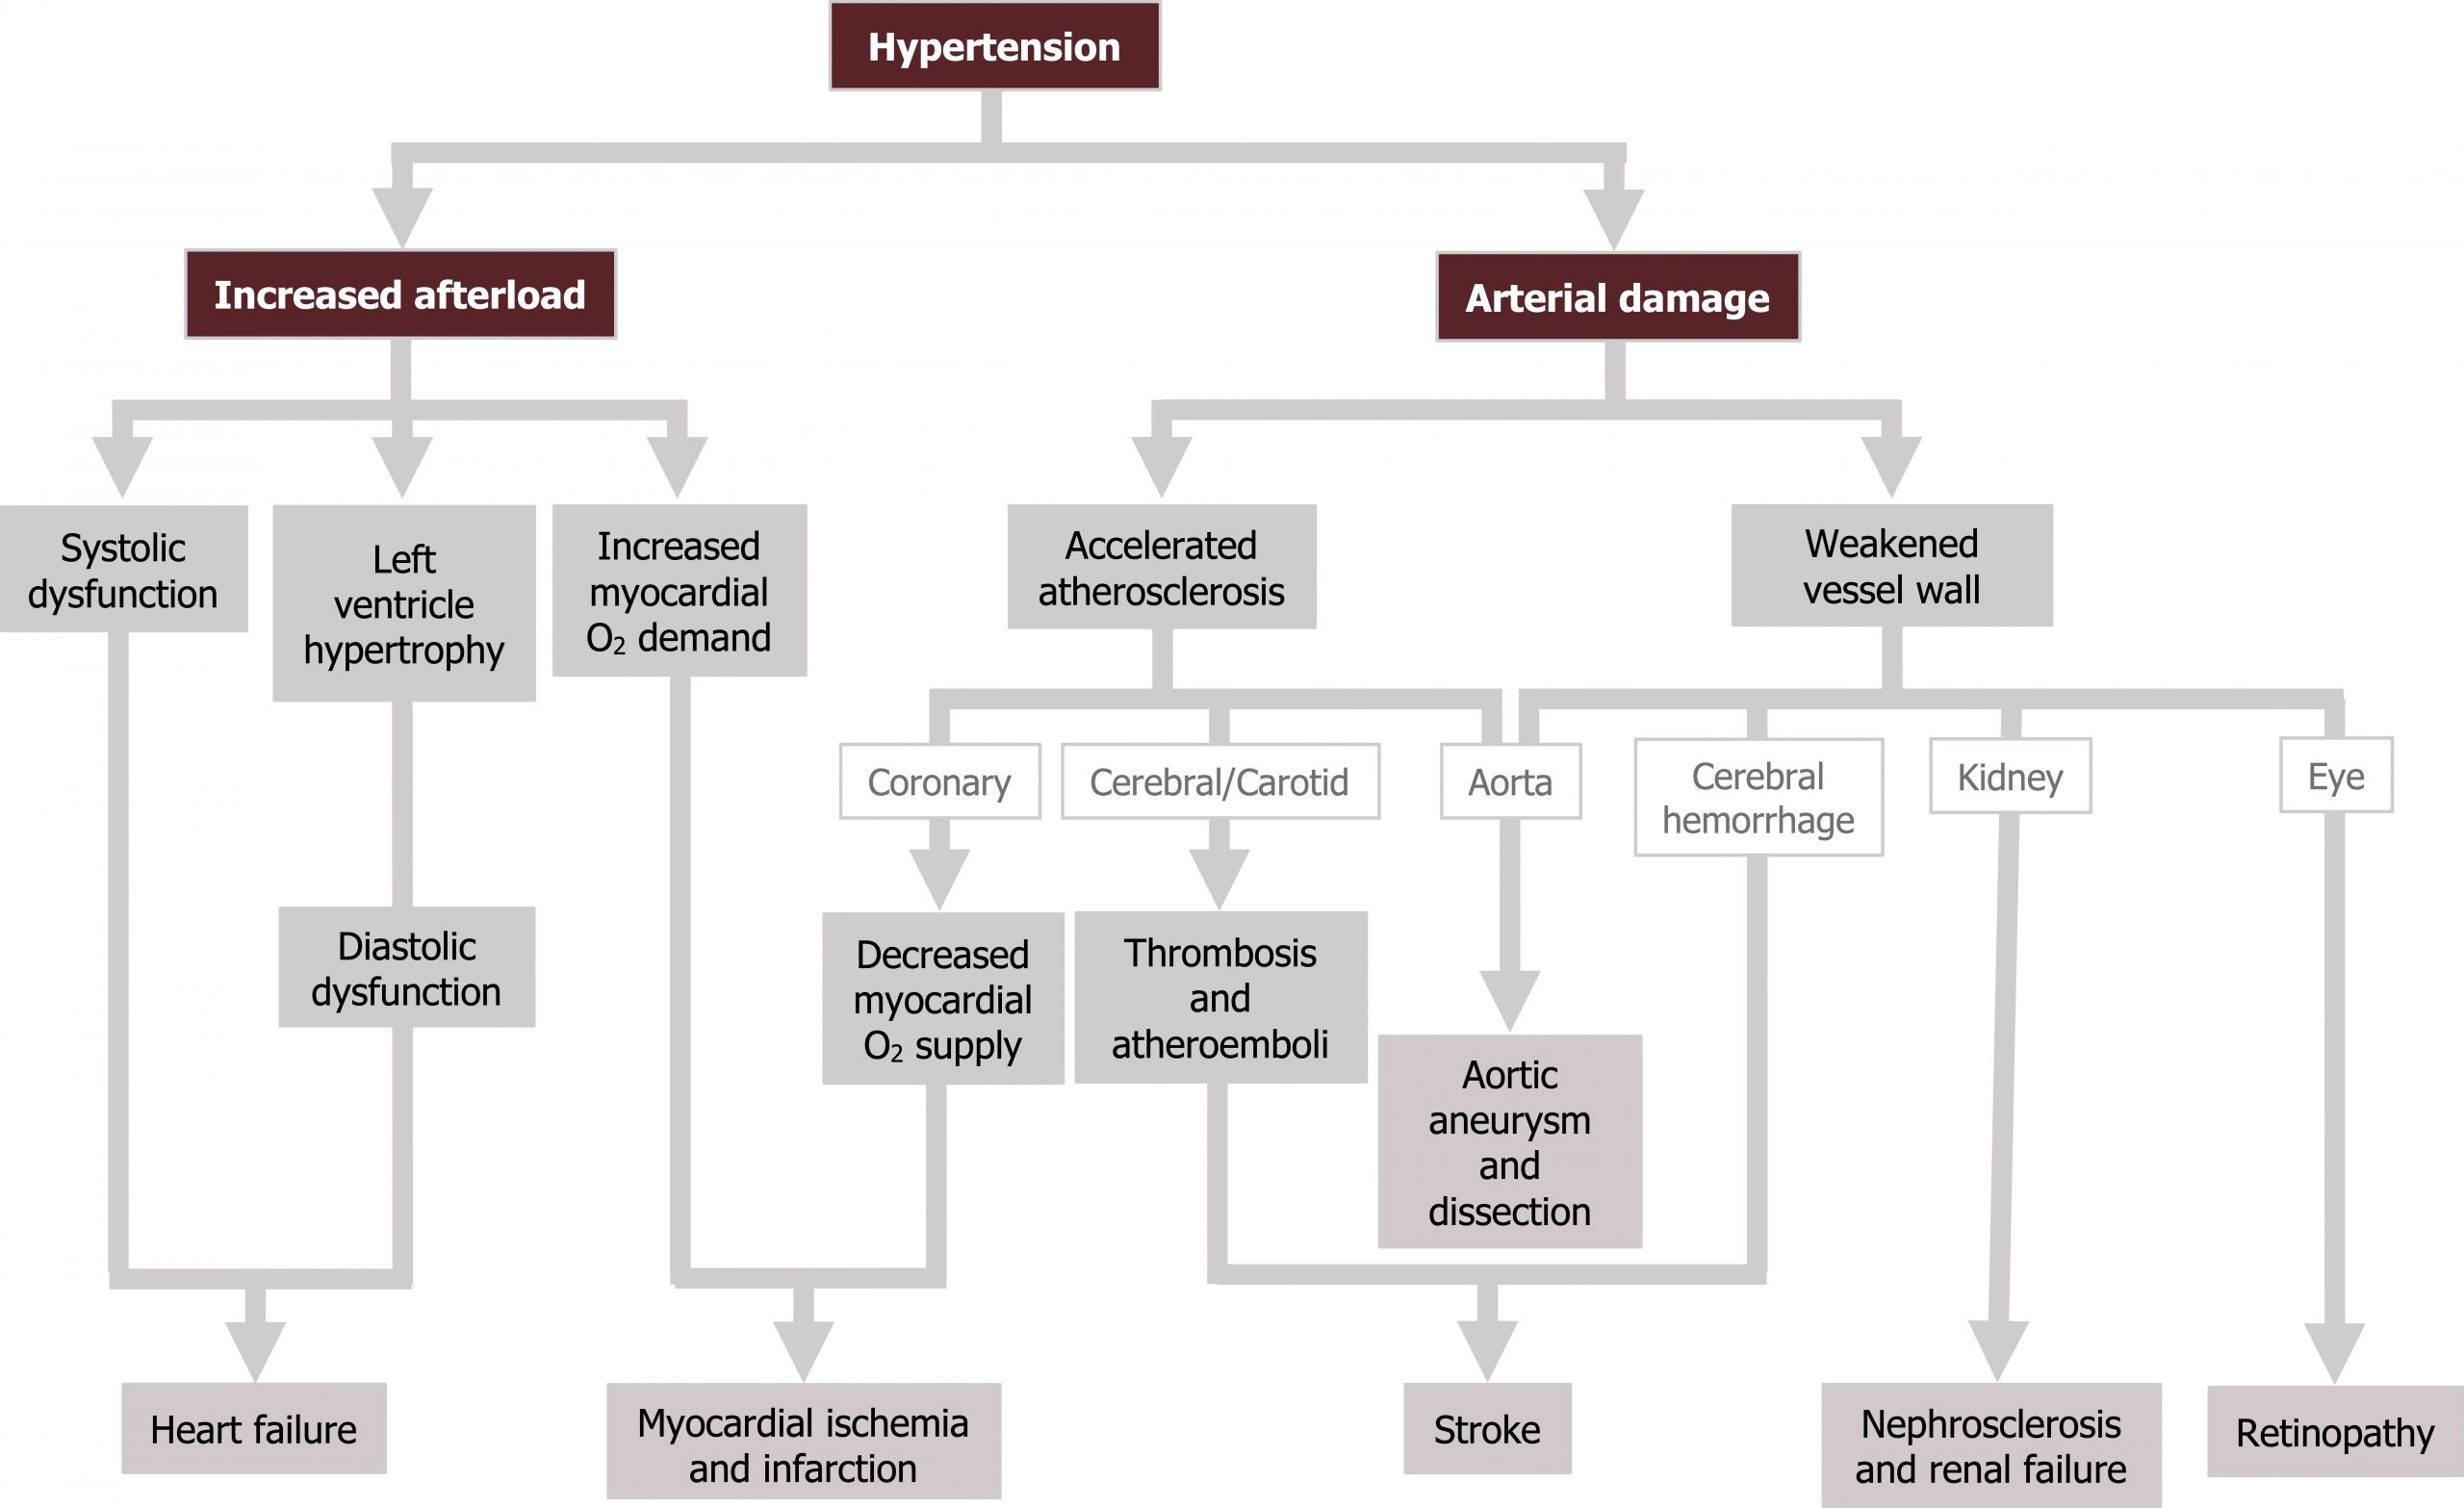 Flow chart beginning with hypertension. Hypertension arrow increased afterload arrows to systolic dysfunction, left ventricle hypertrophy, and increased myocardial O2 demand. LVH arrow diastolic dysfunction. Systolic dysfunction and diastolic dysfunction arrow heart failure. Hypertension arrow arterial damage arrow accelerated atherosclerosis. Accelerated atherosclerosis arrow with text (coronary) to decreased myocardial O2 supply. Increased myocardial O2 demand and decreased myocardial O2 supply arrows to myocardial ischemia and infarction. Accelerated atherosclerosis arrow with text cerebral/carotid to thrombosis and atheroemboli arrow stroke. Accelerated atherosclerosis arrow with text aorta to aortic aneurysm and dissection. Arterial damage arrow weakened vessel wall arrow with text aorta to aortic aneurysm and dissection. Weakened vessel wall arrow with text cerebral hemorrhage to stroke. Weakened vessel wall arrow with text kidney to nephrosclerosis and renal failure. Weakened vessel wall arrow with text eye to retinopathy.